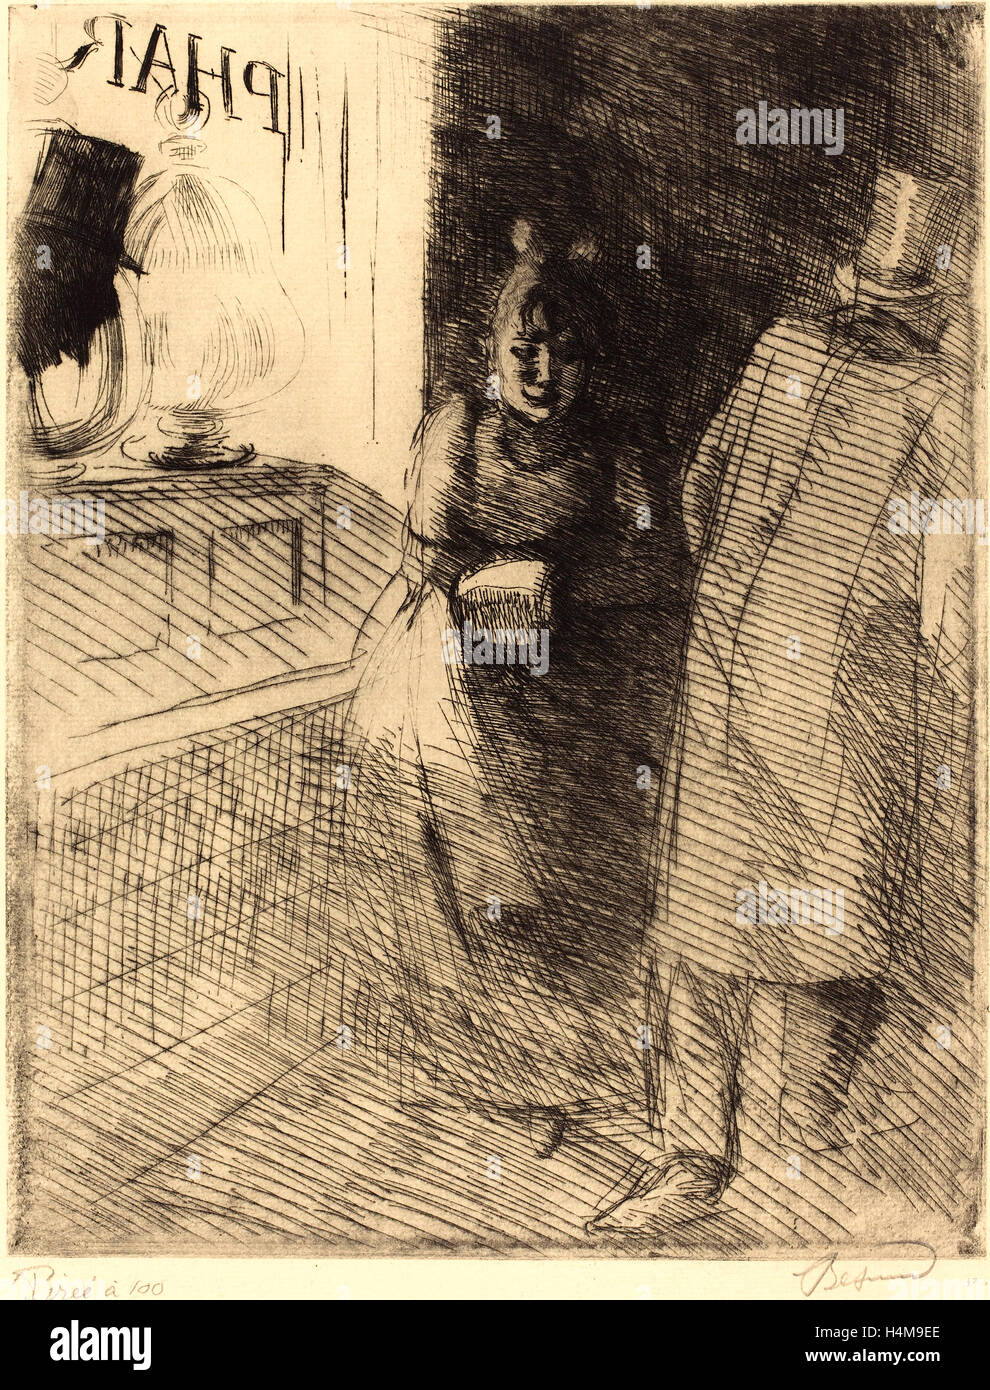 Albert Besnard, French (1849-1934), Prostitution (La Prostitution), c. 1886, etching and drypoint on laid paper Stock Photo